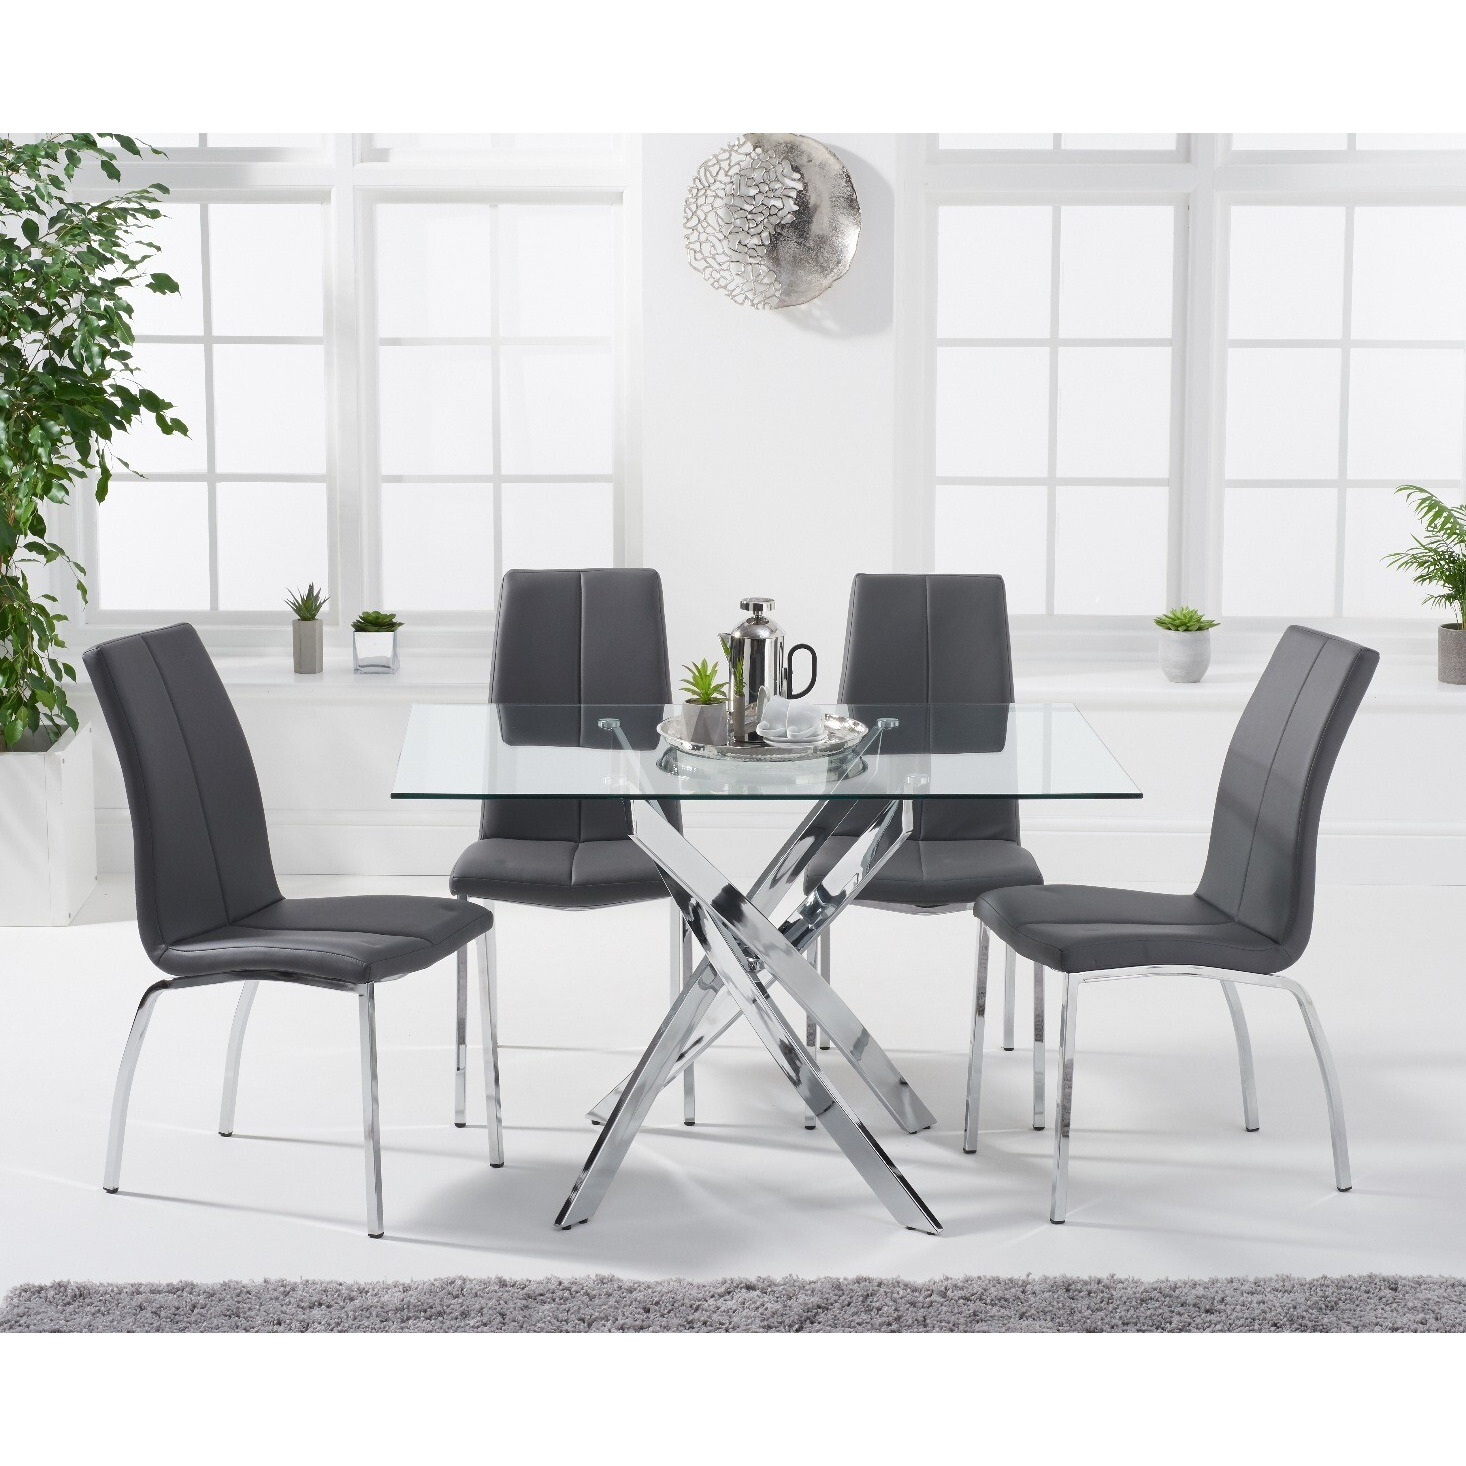 Denver 120cm Rectangular Glass Dining Table with 4 Black Marco Chairs